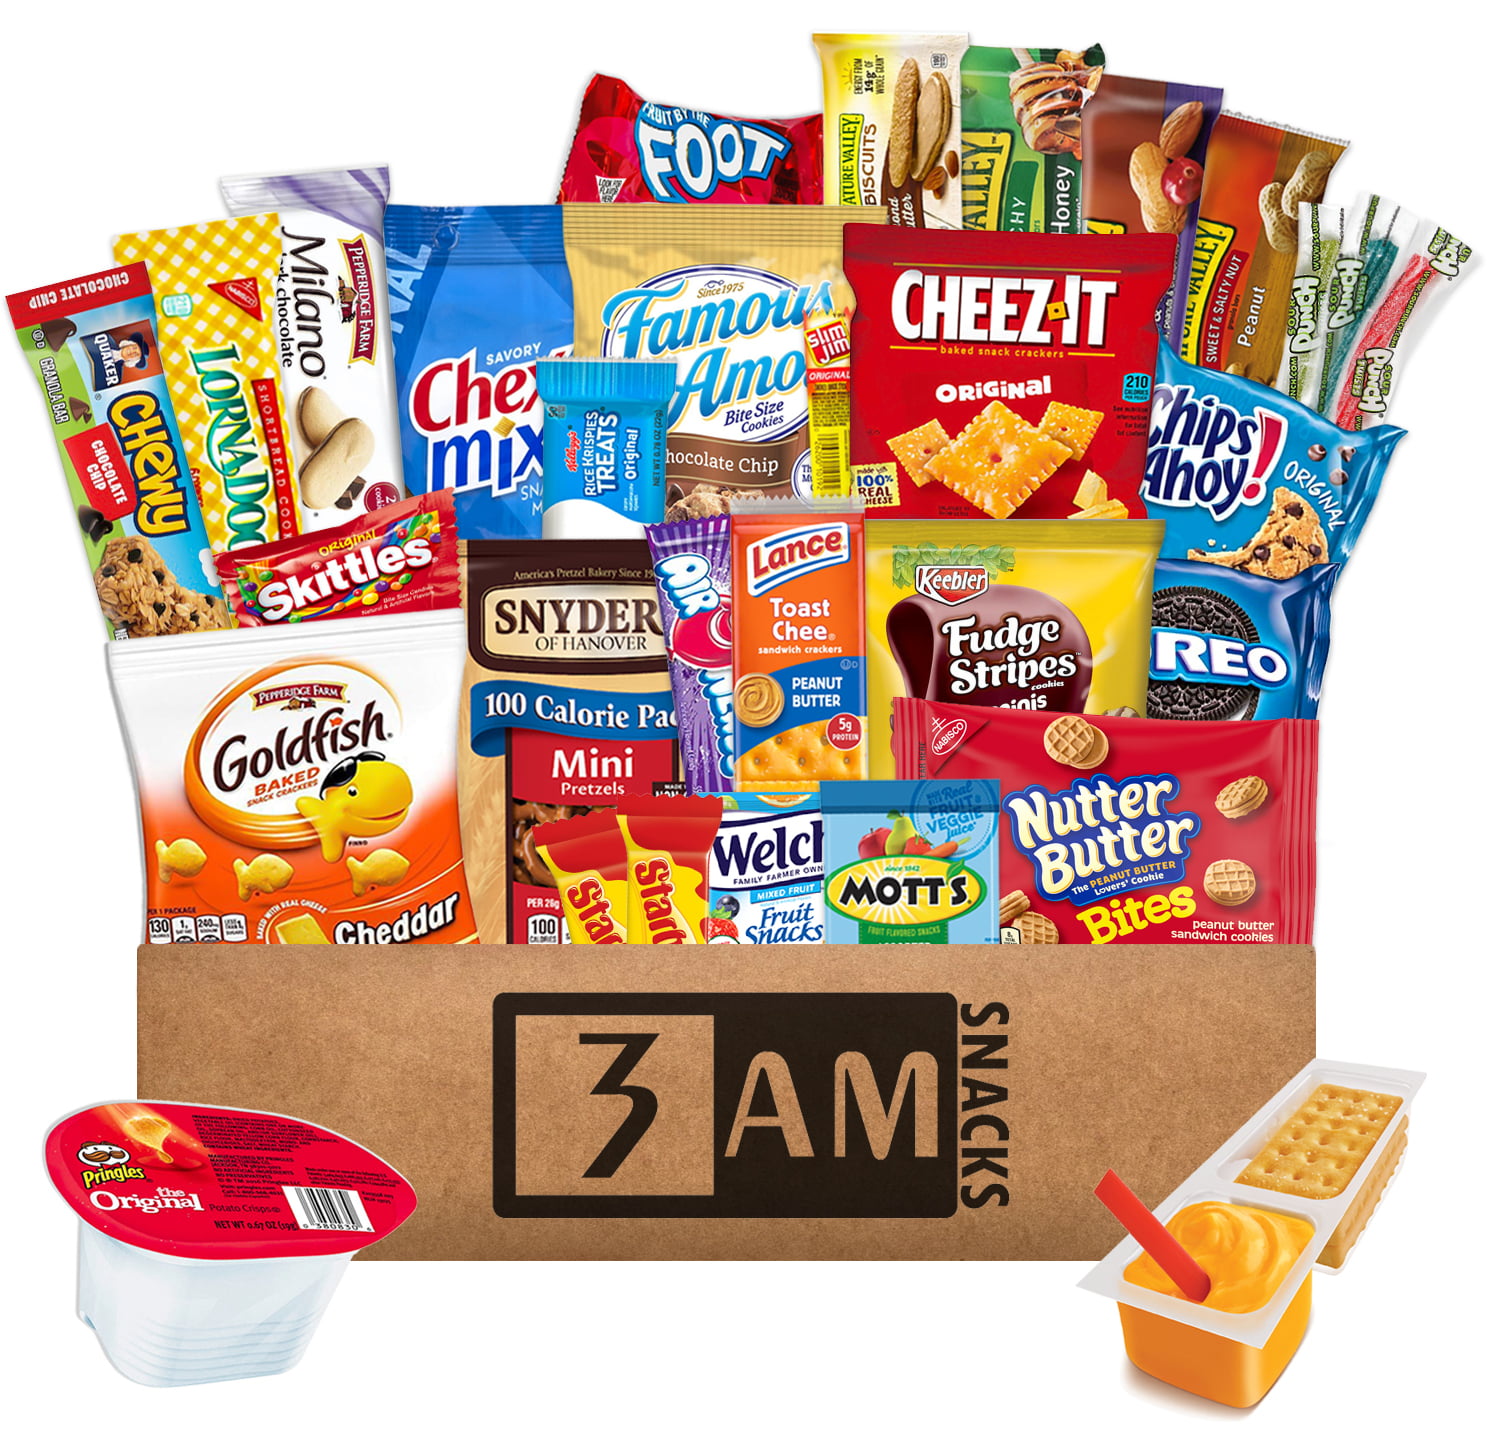 3 AM Snacks Snack Boxes, Halloween Gifts, Snack Chest, Snacks Assortment, Study Gift Basket, 45 Count - Walmart.com